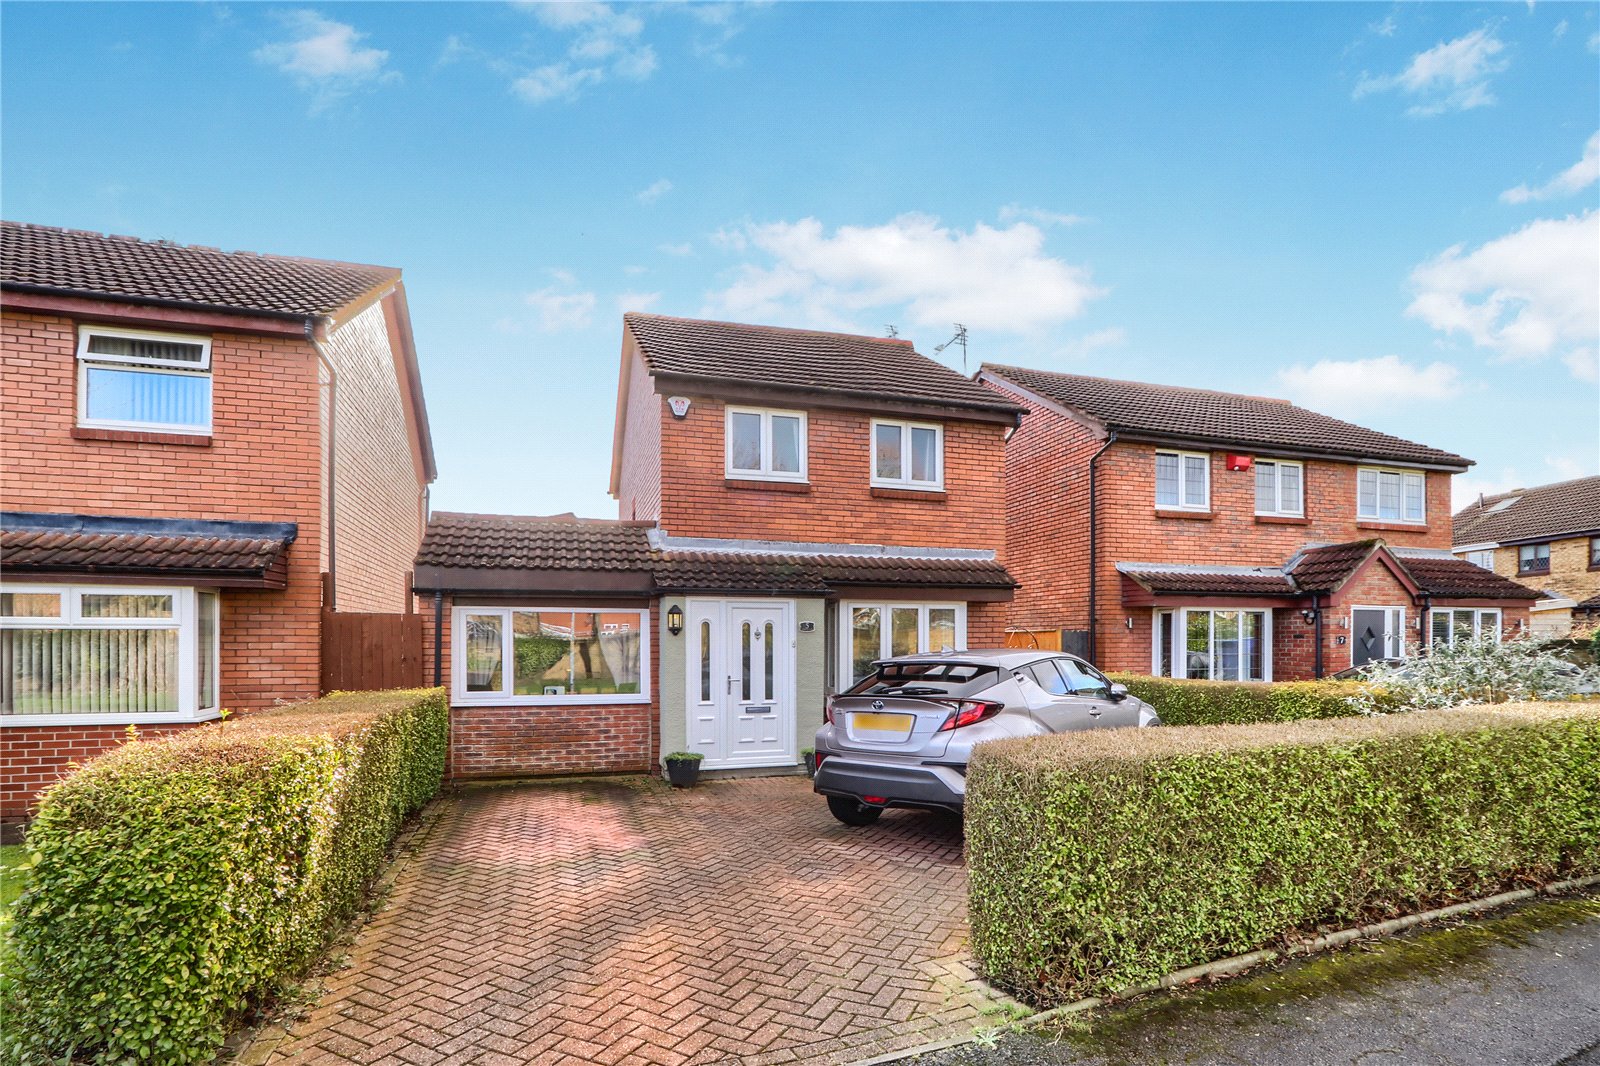 3 bed house for sale in Barford Close, The Glebe - Property Image 1